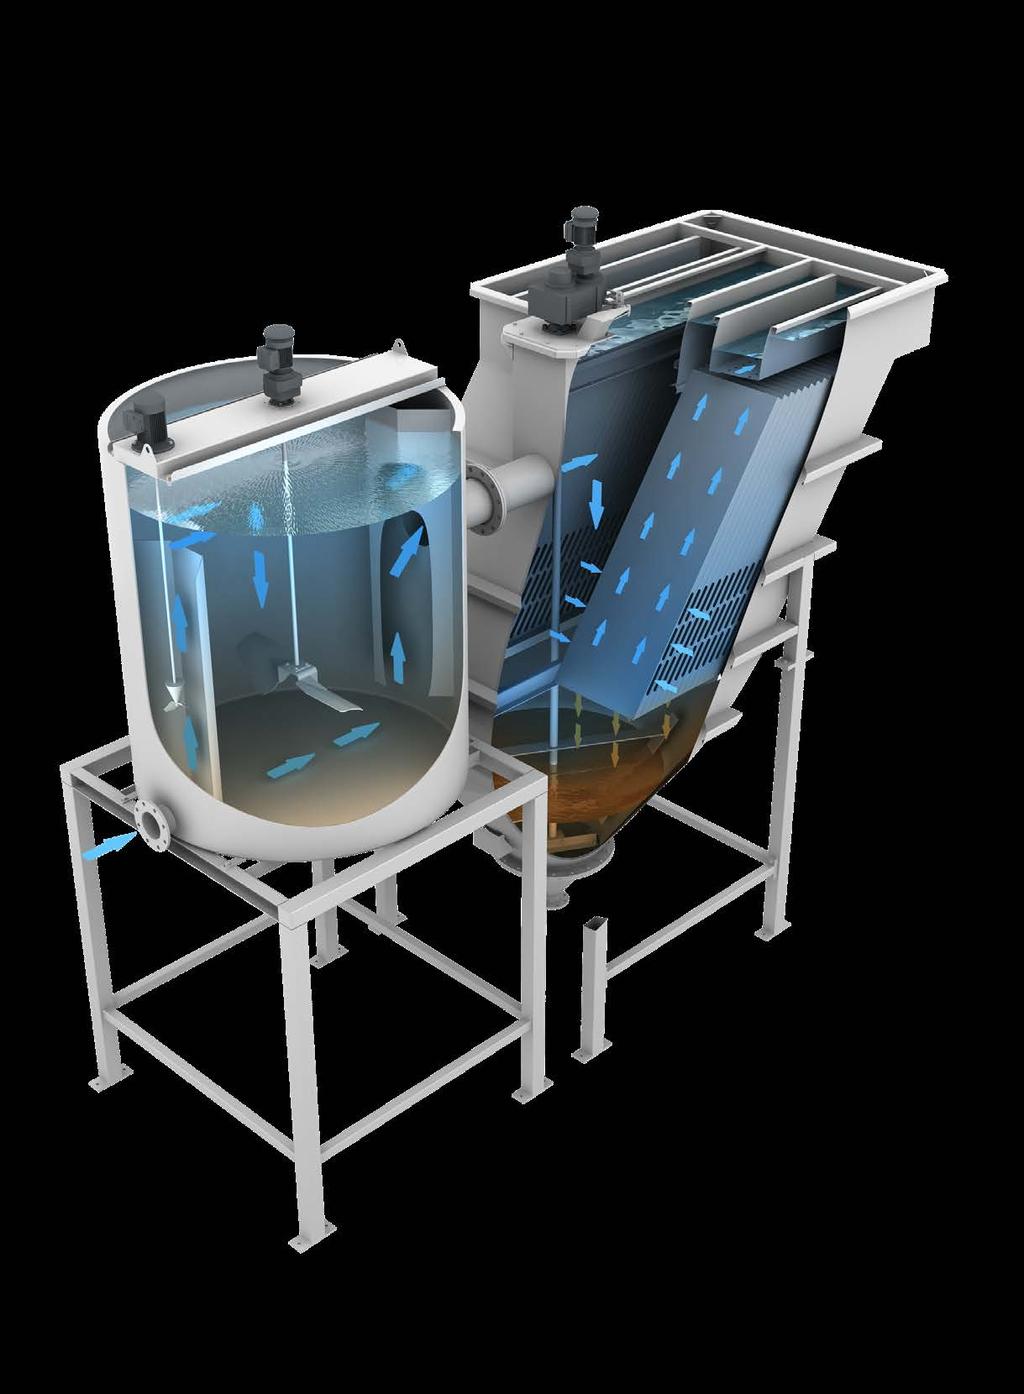 FREE STANDING MODELS All free standing models can optionally be equipped with one or more flocculation tank(s) with agitator and rapid mixer to improve flocculation and sedimentation.